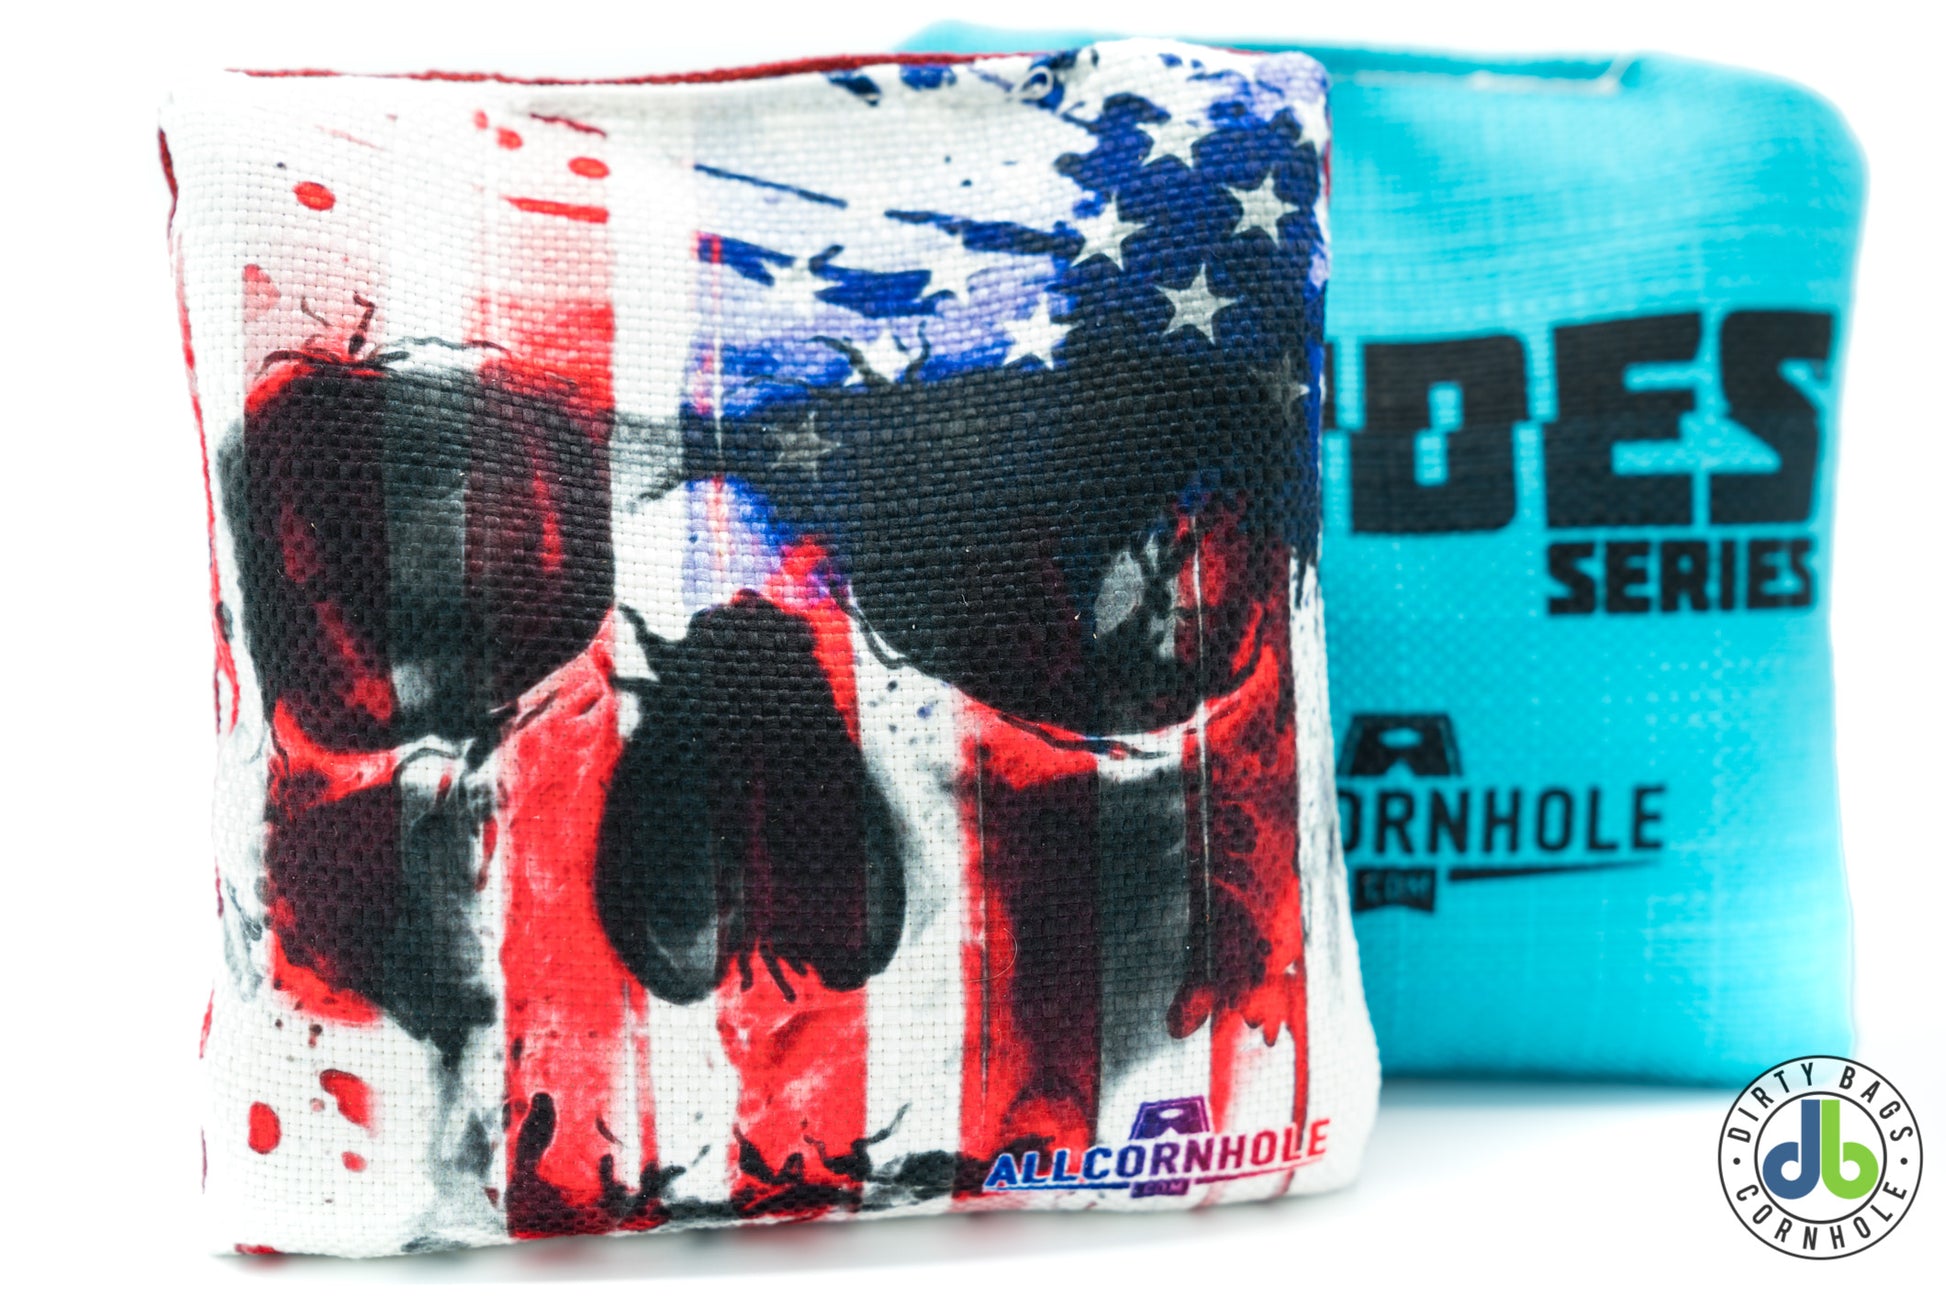 Turquoise Skull ACL Cornhole Bags